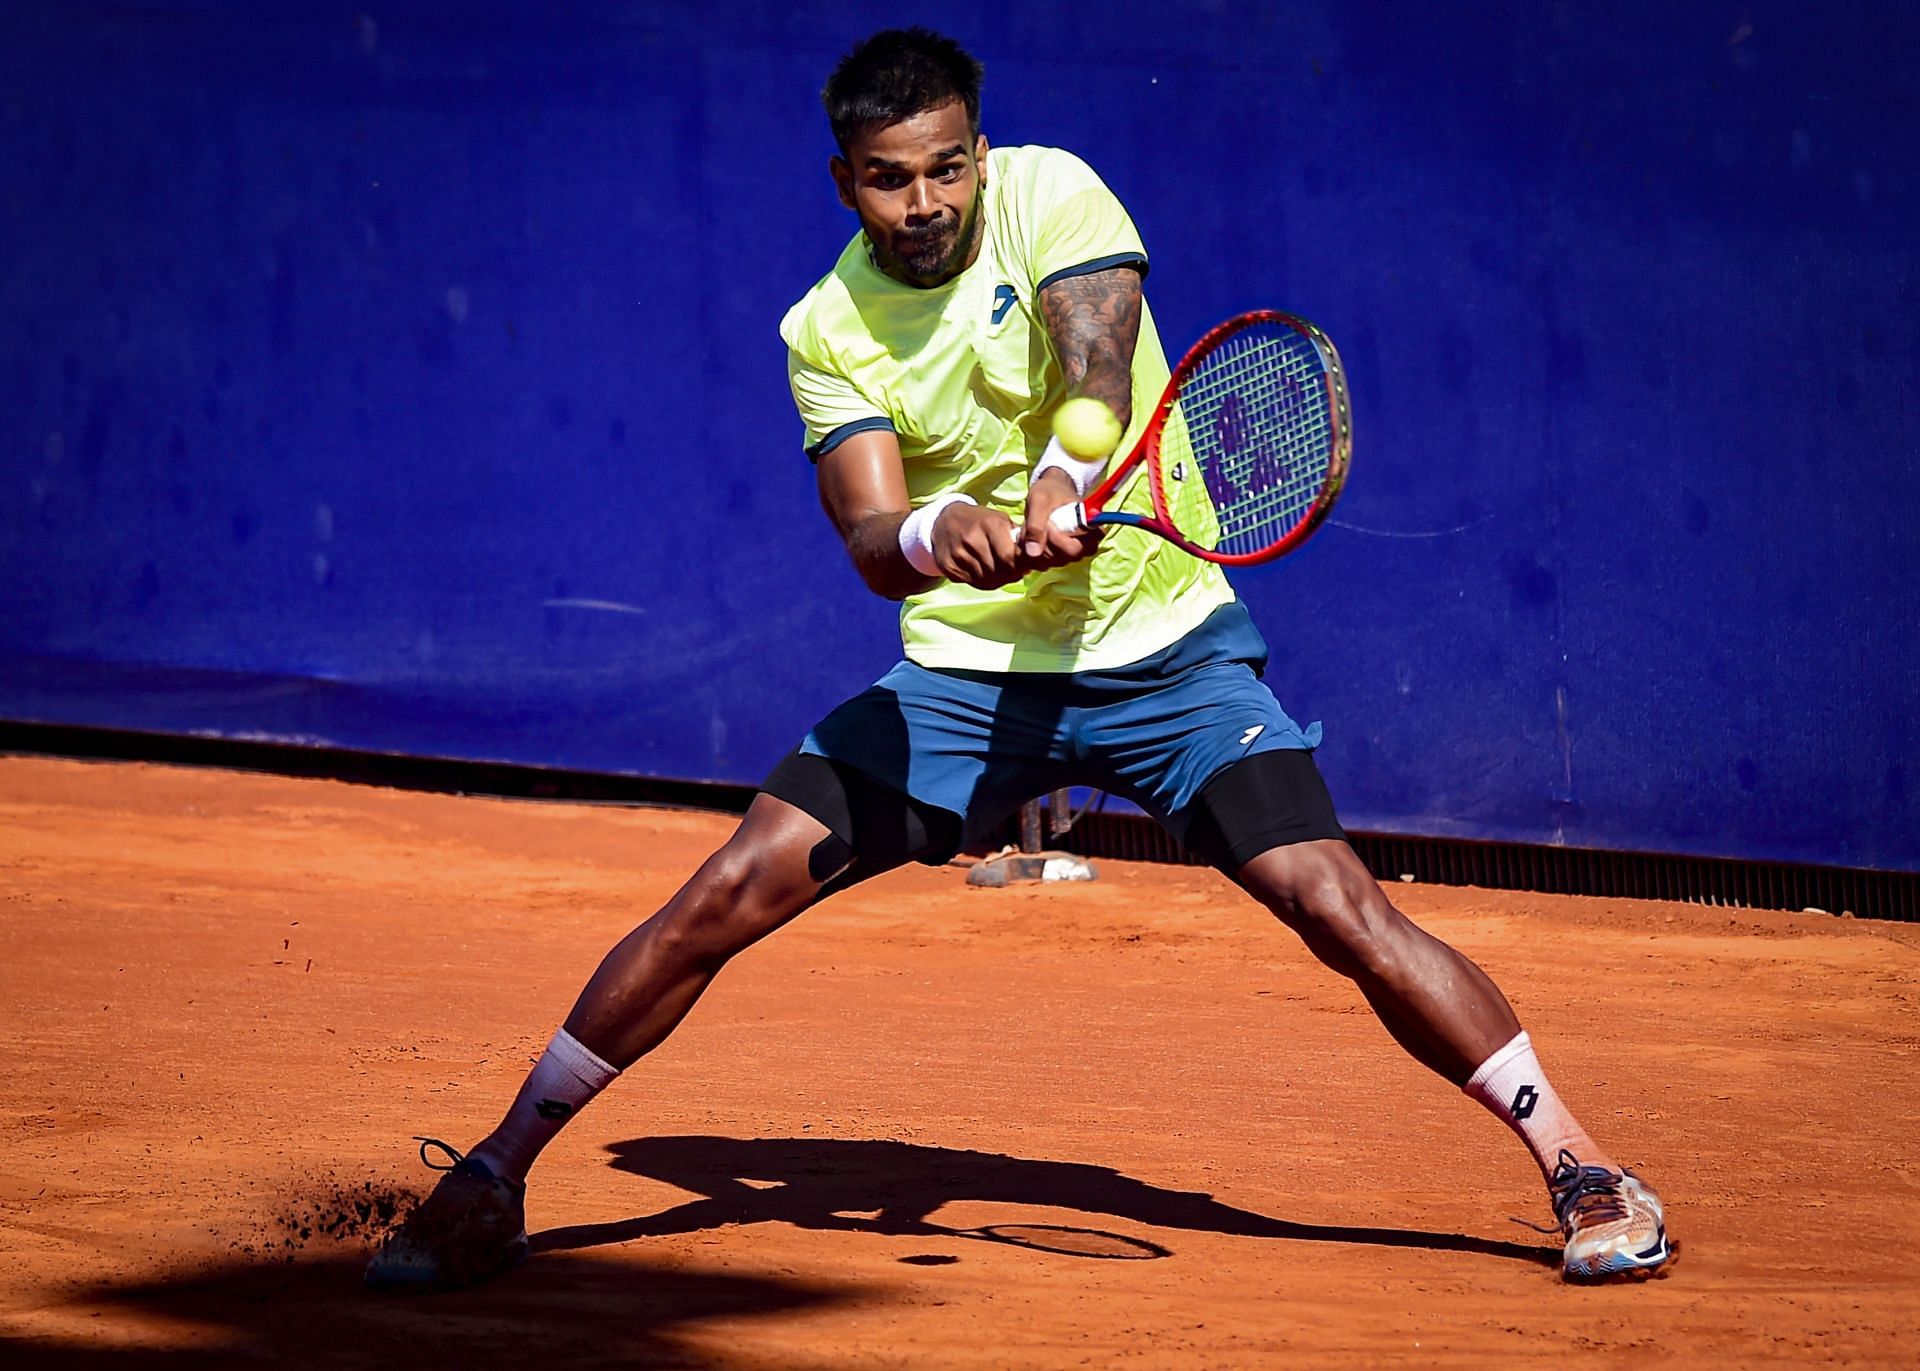 Sumit Nagal beats Daniel Rincon to enter Tampere Open final